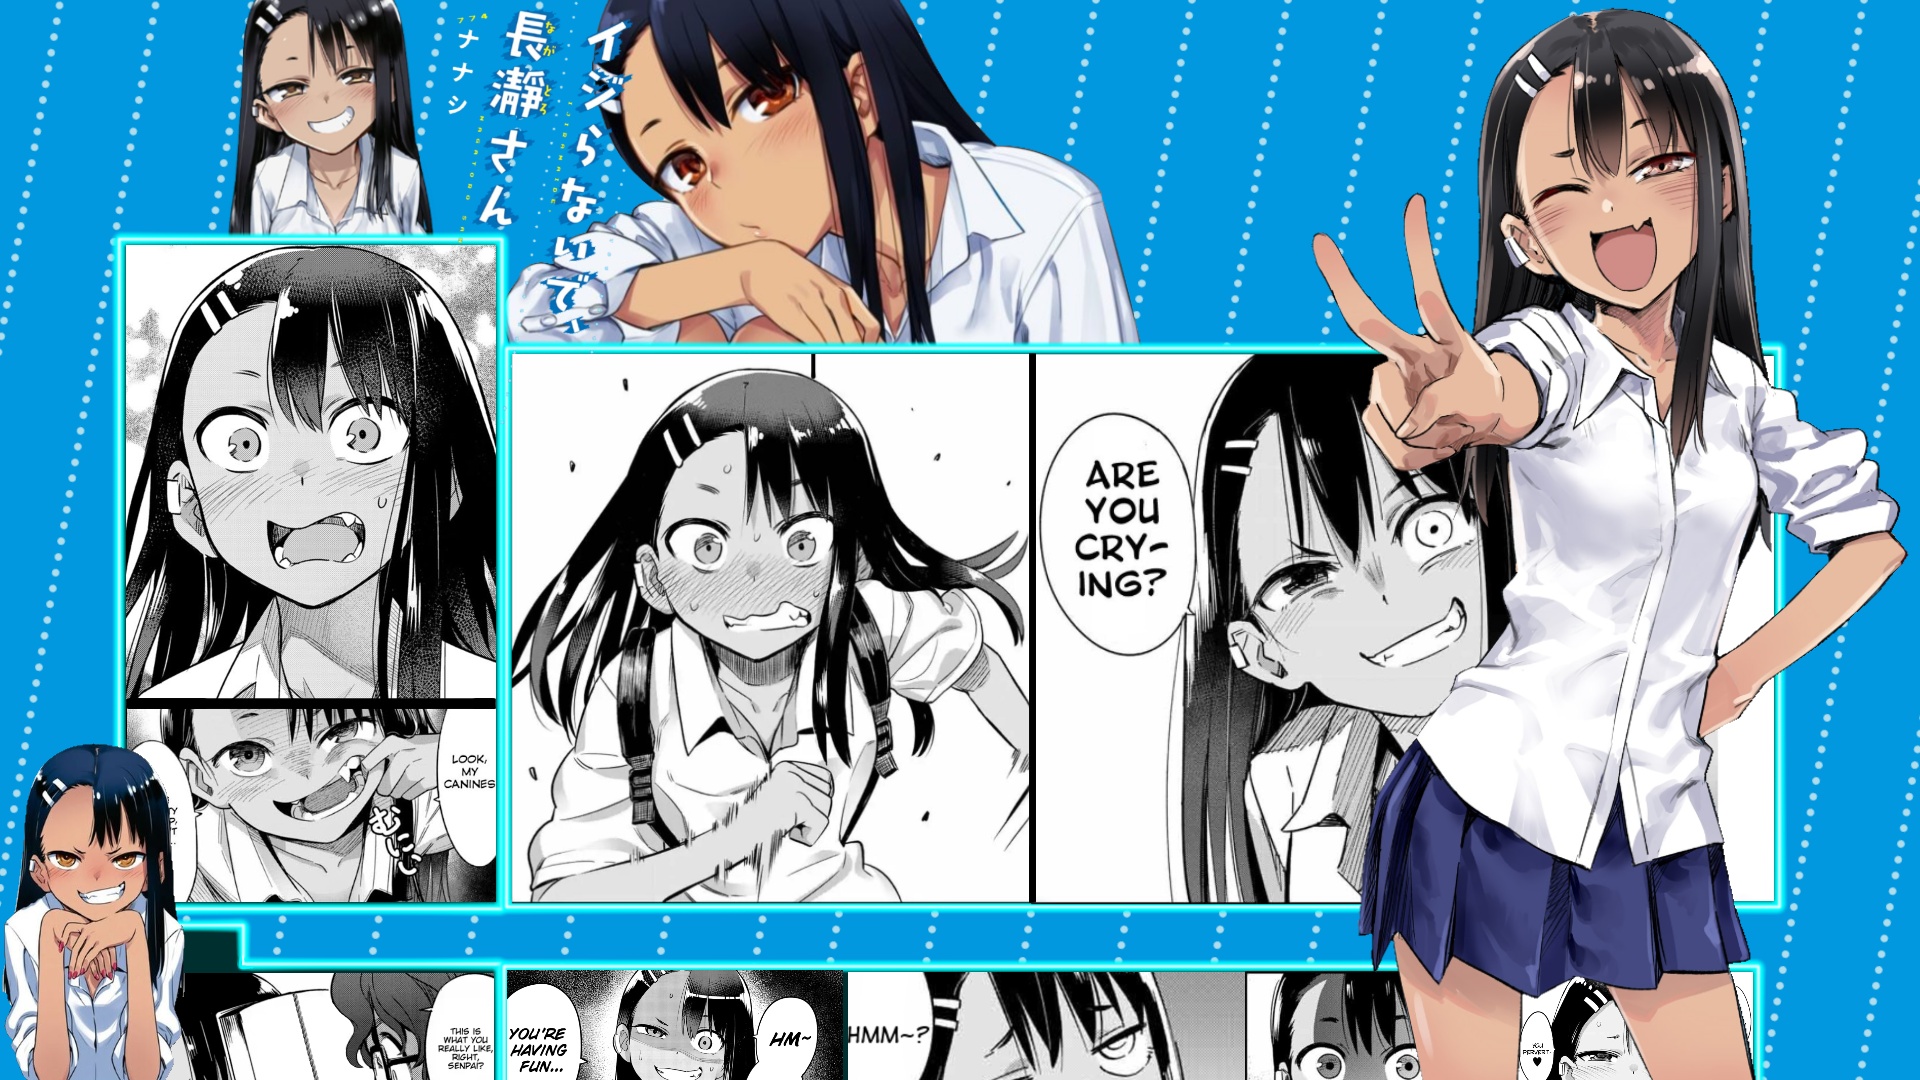 For my xbox peeps, I made a Nagatoro backgrounds and thought I should share...